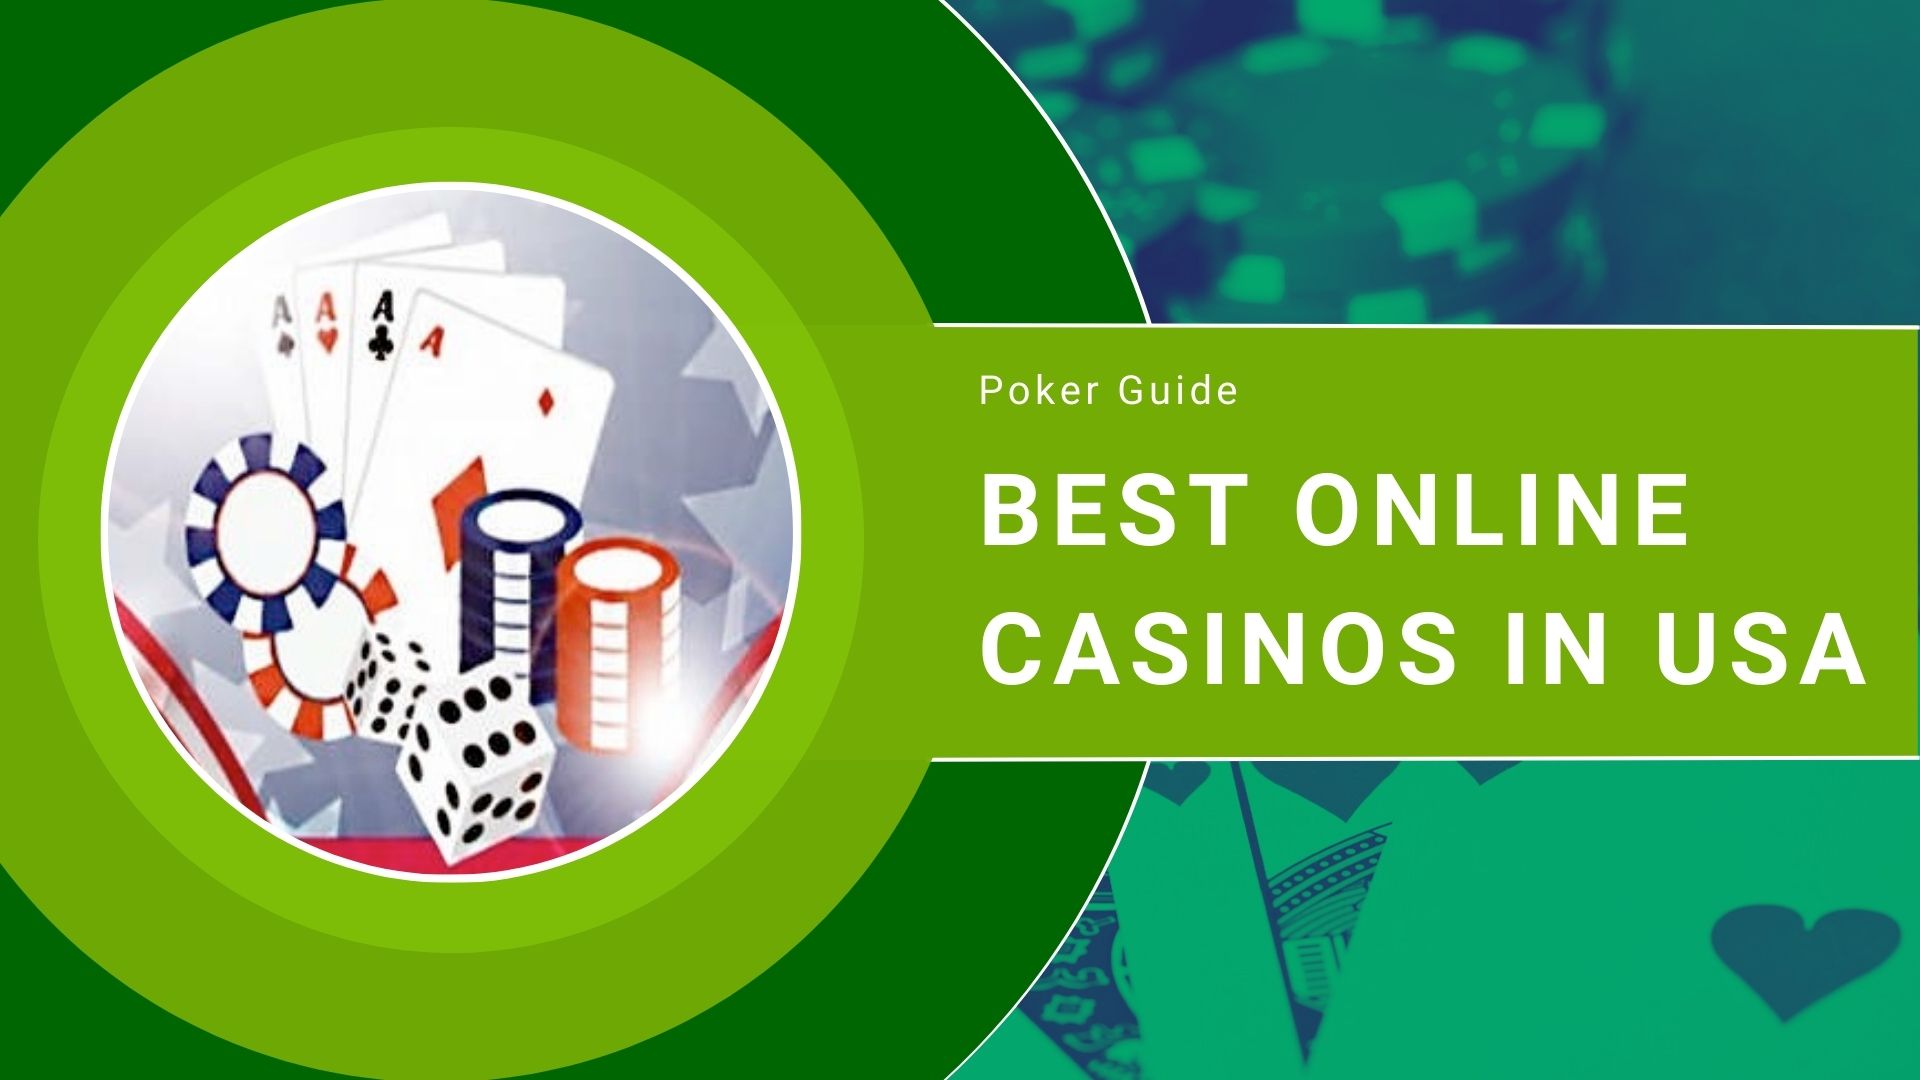 Top 3 online casinos where to win money in USA